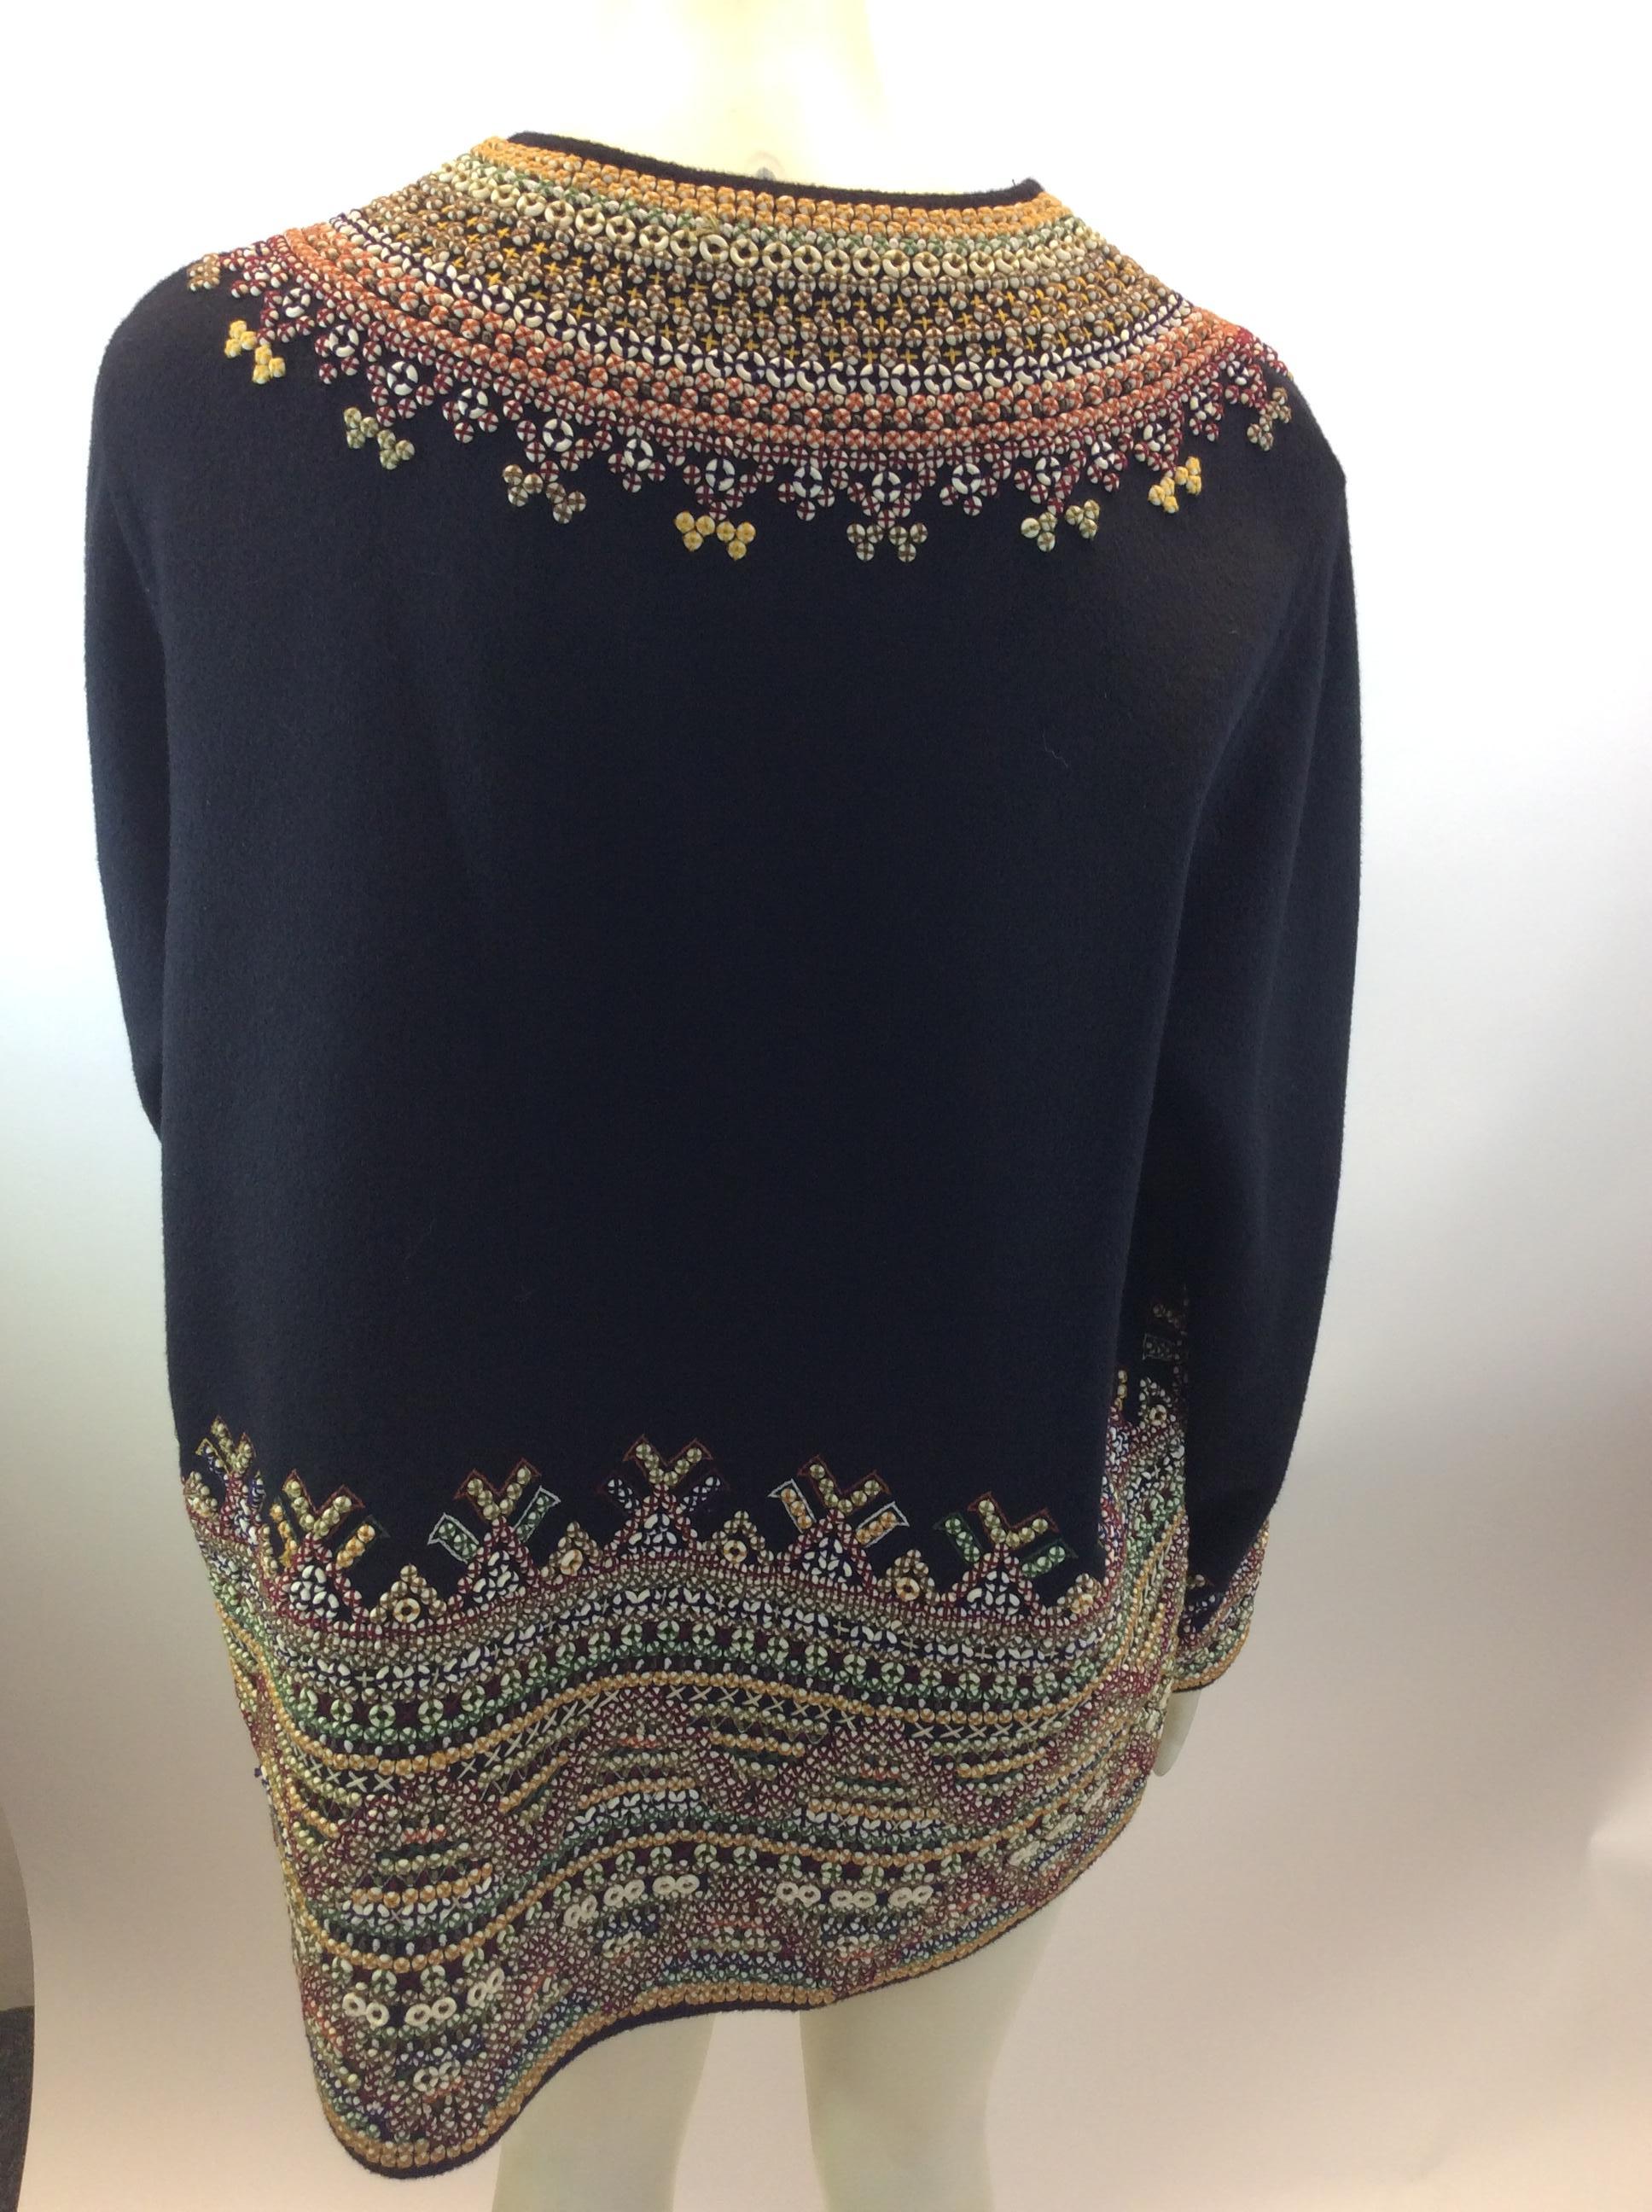 Oscar de la Renta Black Cashmere Beaded Jacket In Excellent Condition For Sale In Narberth, PA